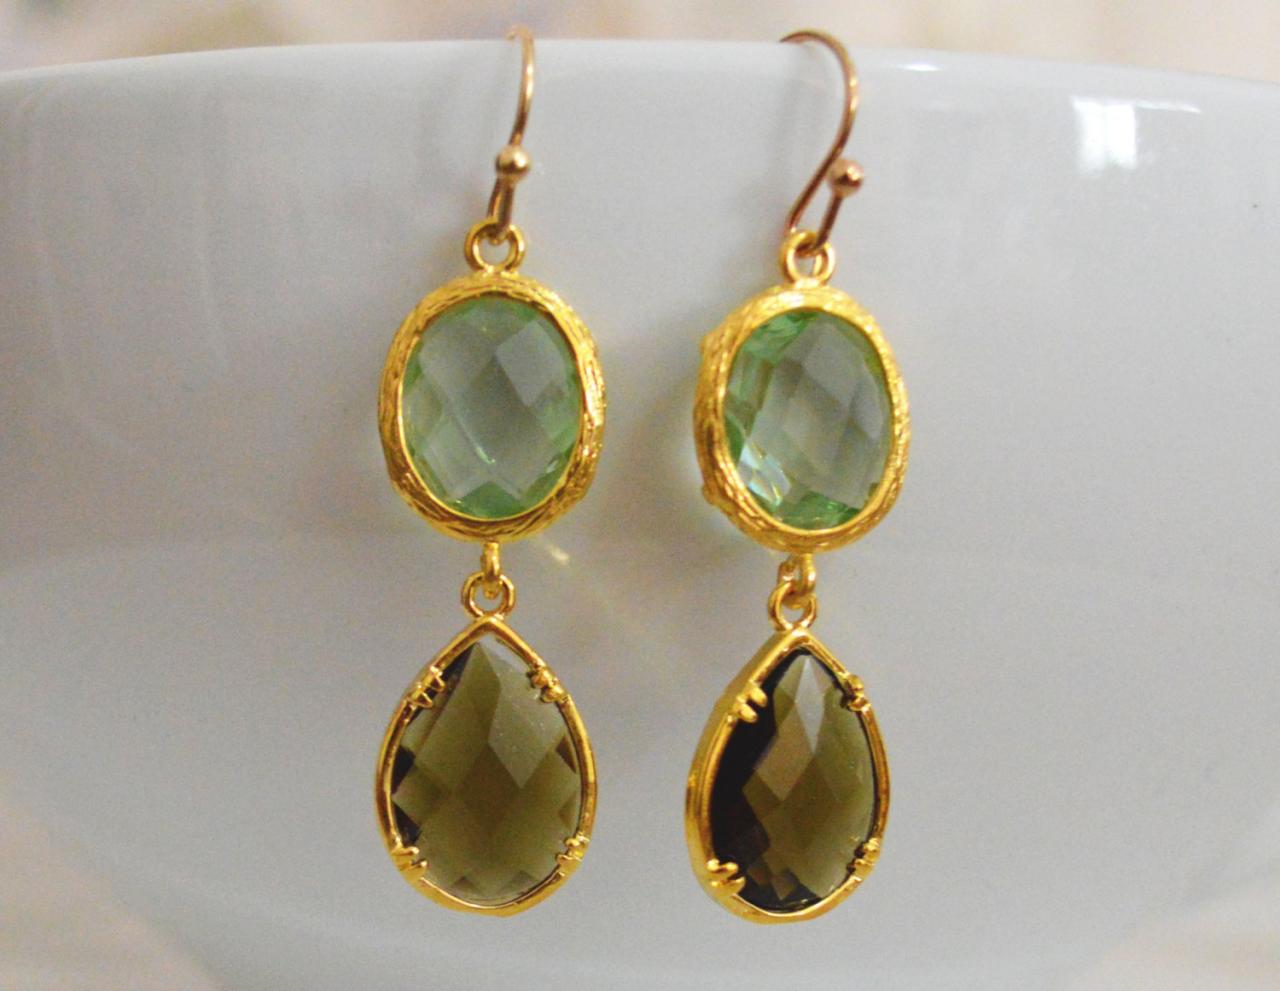 SALE) B-037 Glass earrings, Chrysolite & morion drop earrings, Dangle earrings, Gold plated earrings/Bridesmaid gifts/Everyday jewelry/